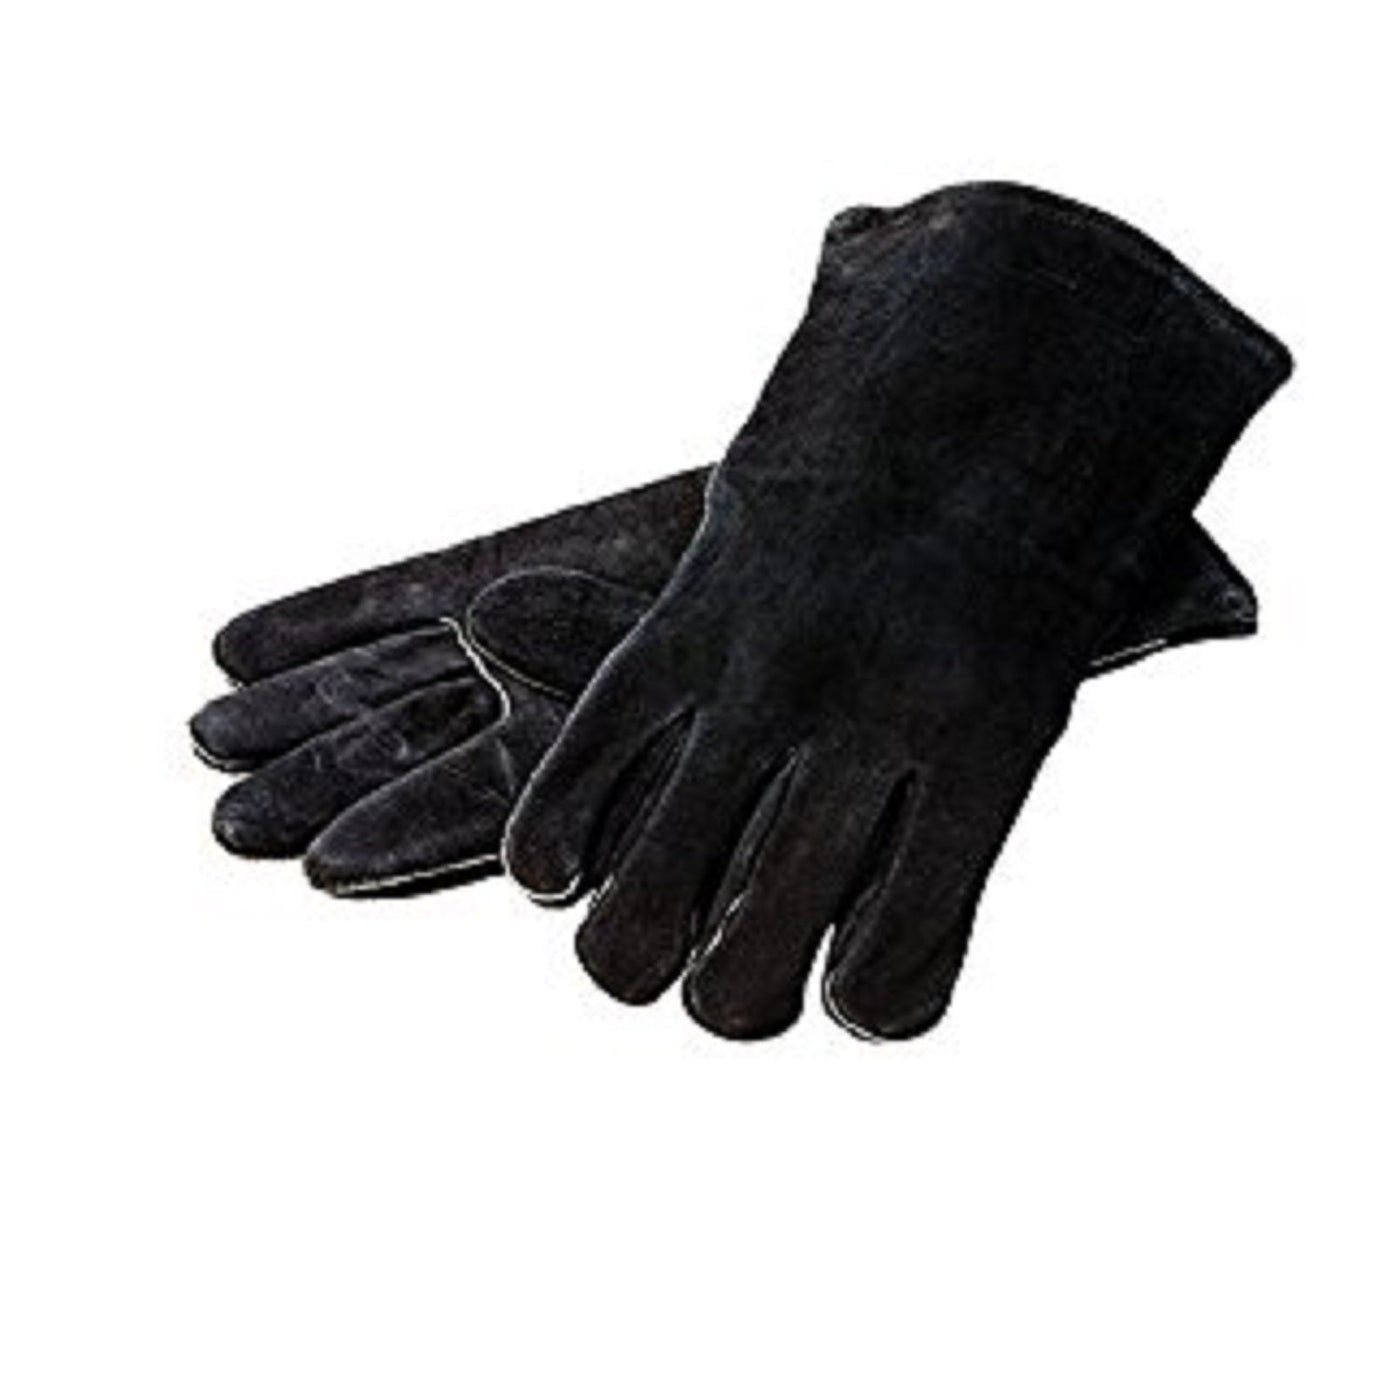 Lodge Cast Iron Lodge Logic Leather Gloves Camping And Outdoor